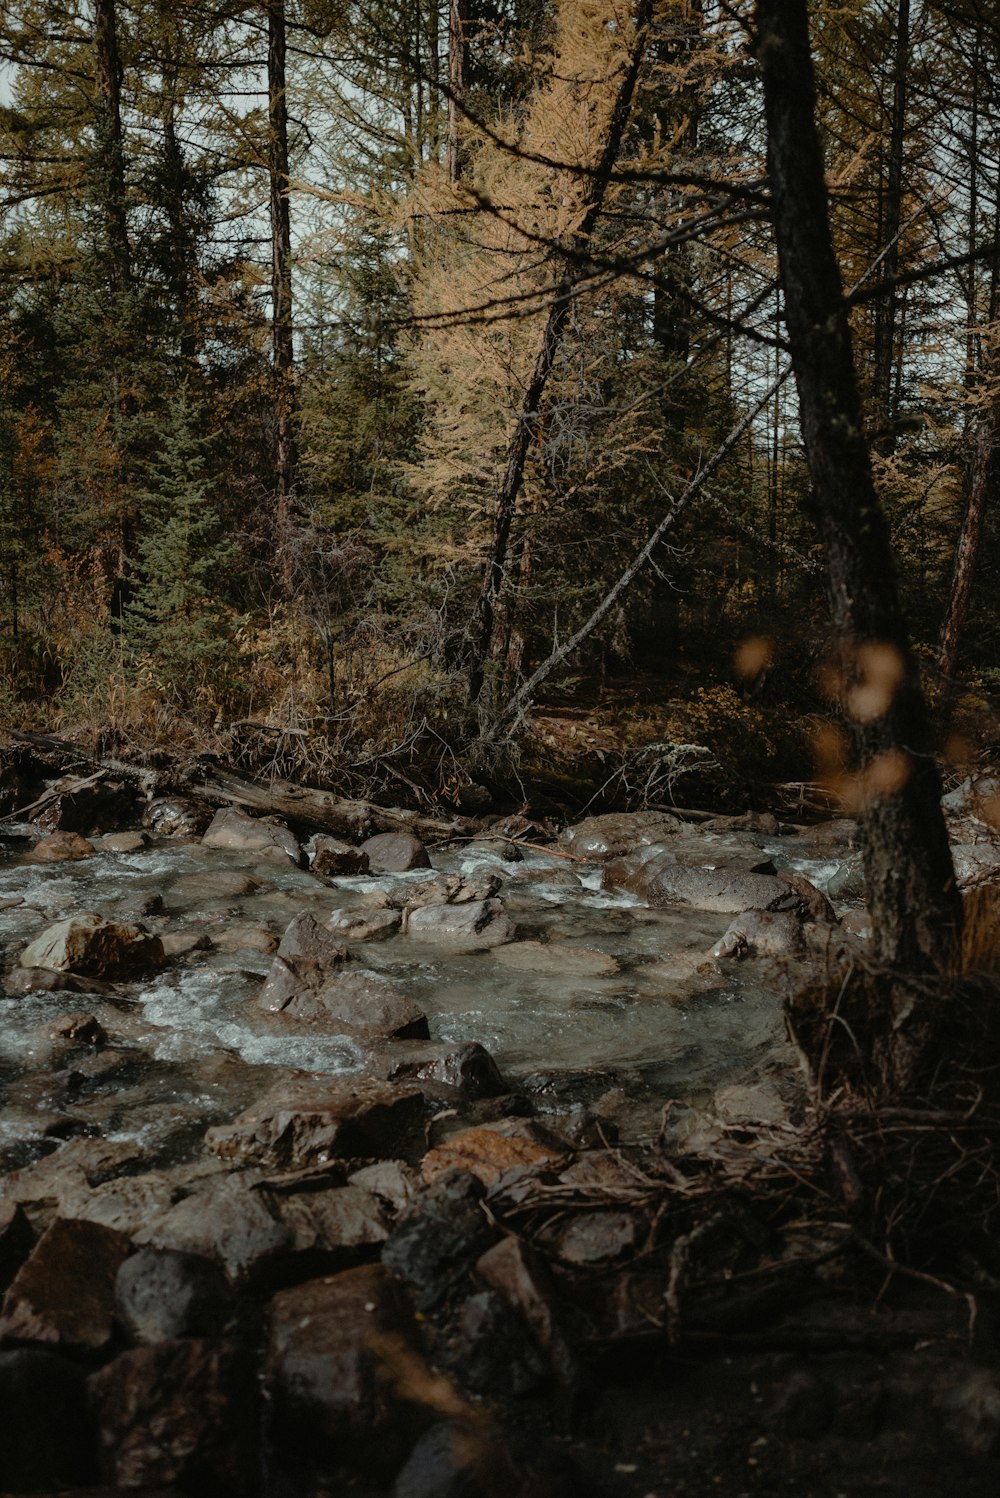 a river running through a forest filled with lots of rocks